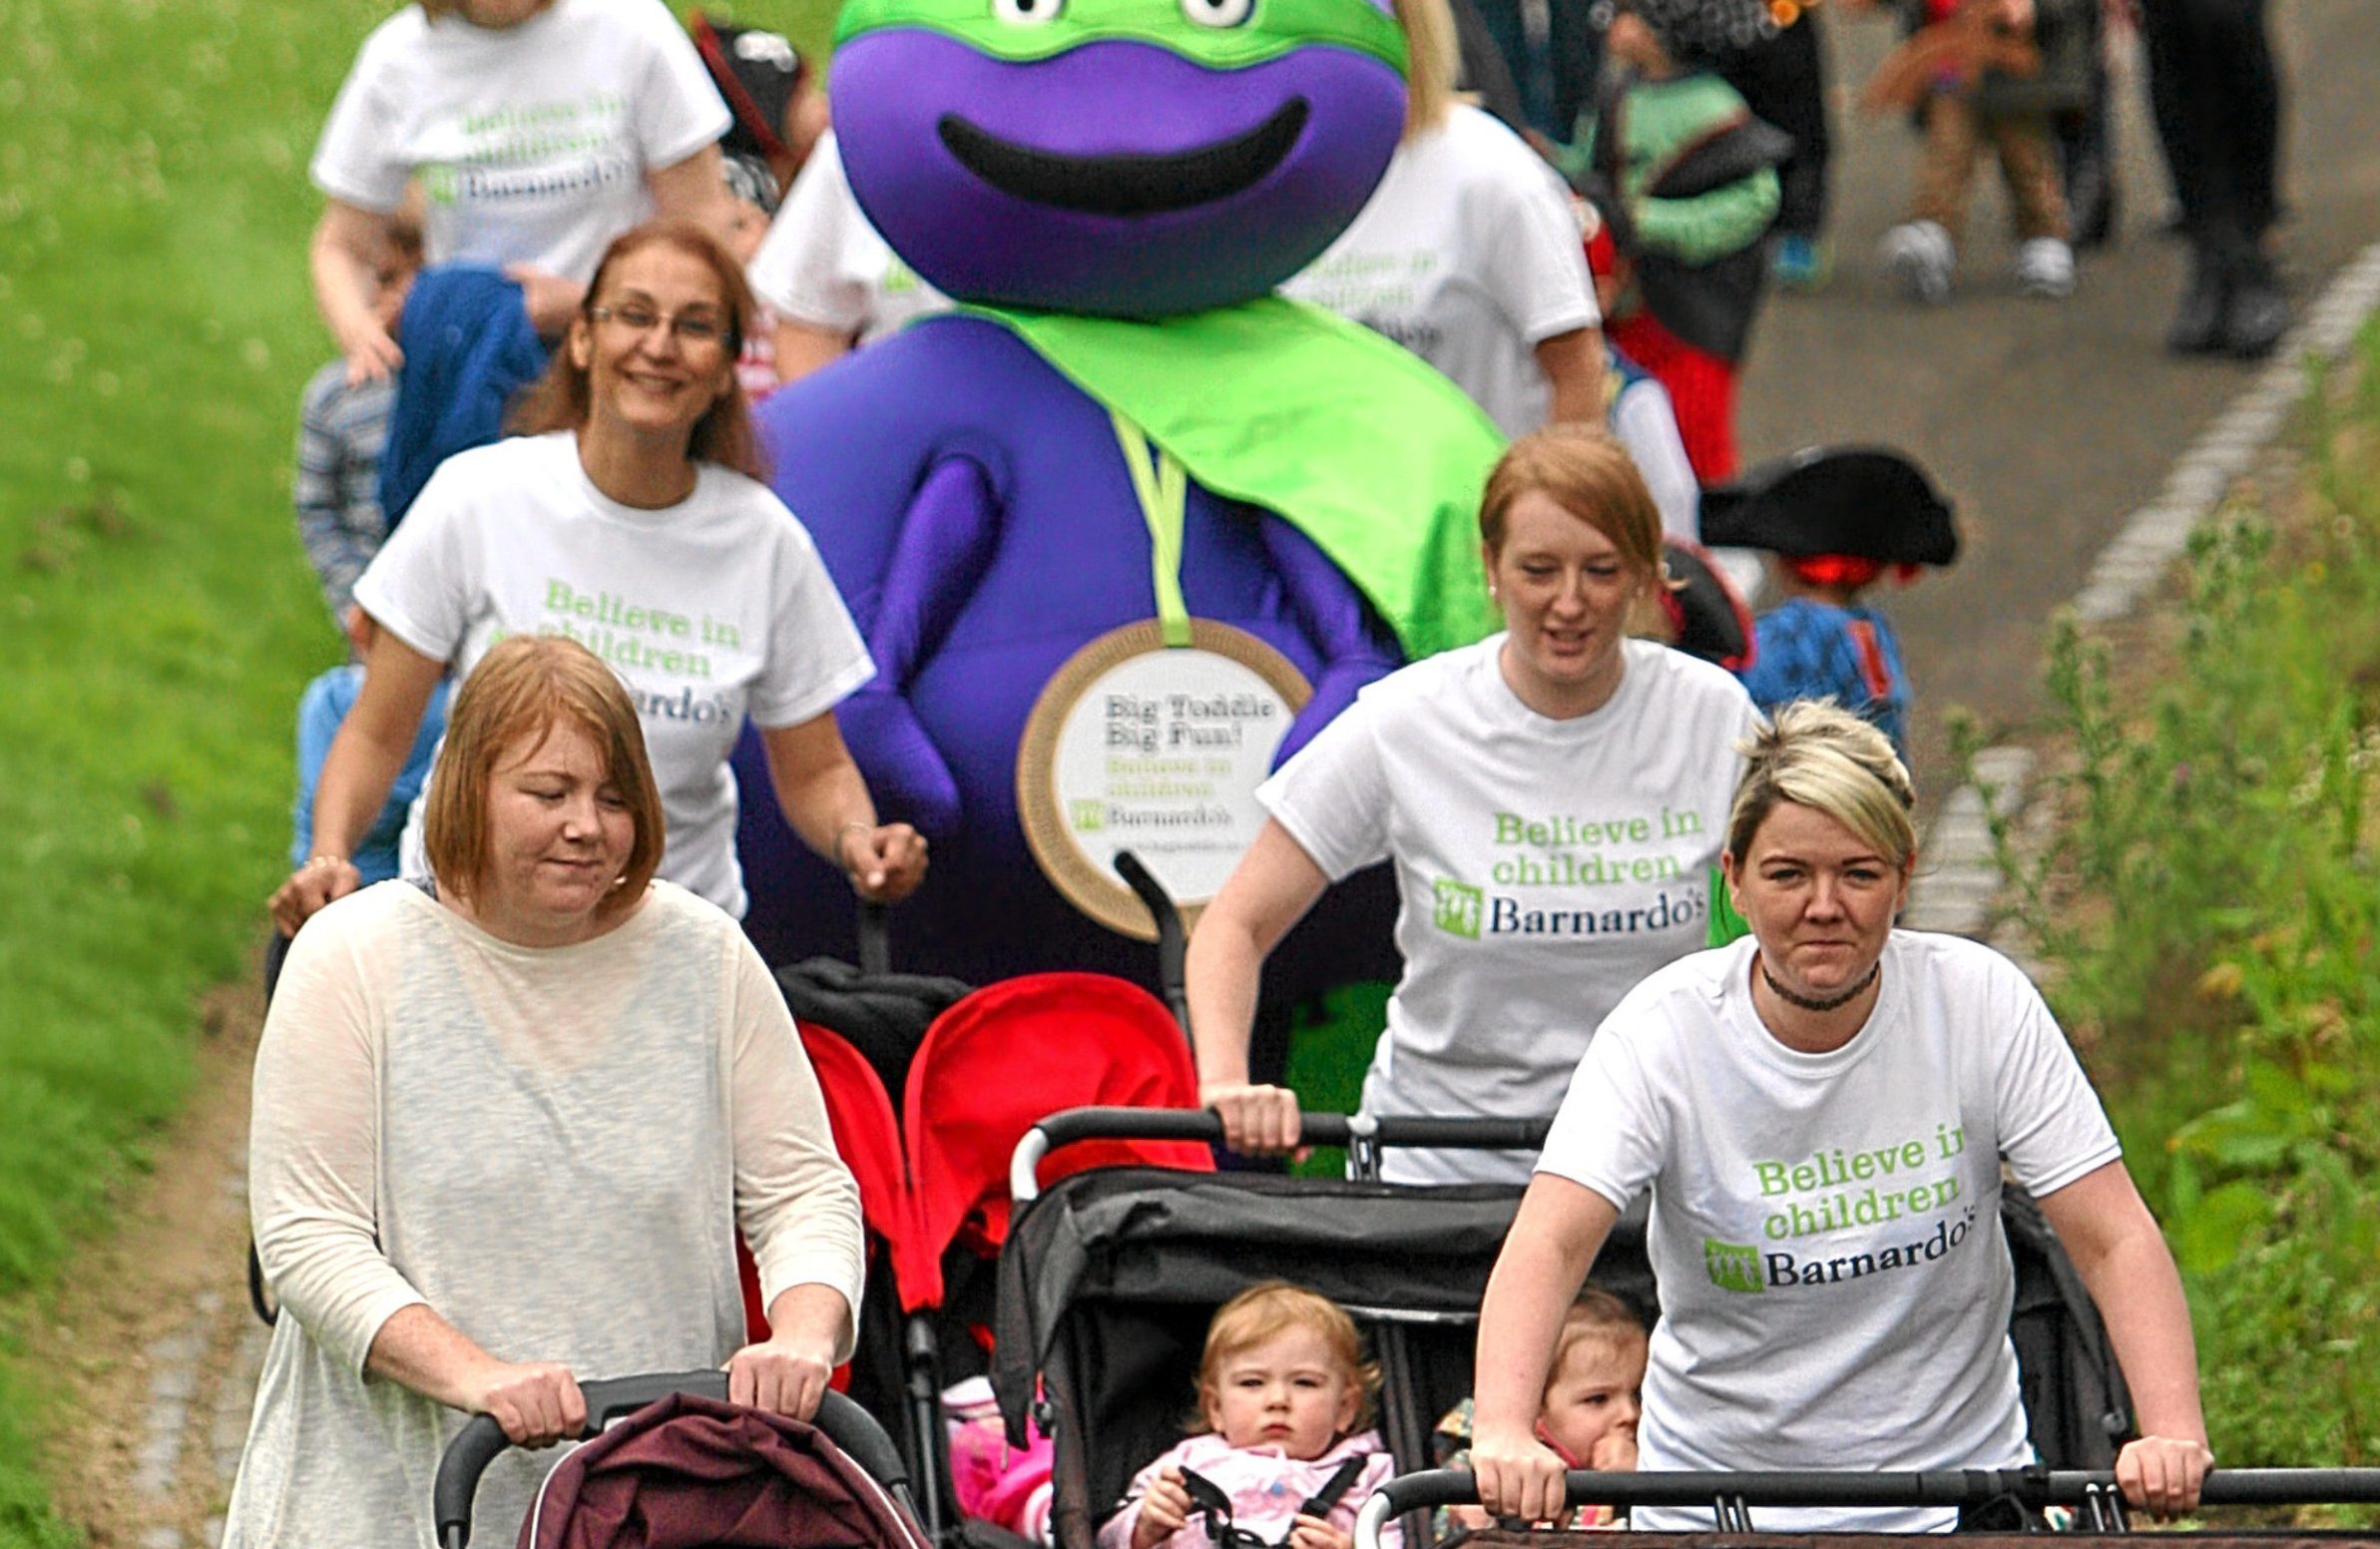 Walkers in the 2015 Big Toddle.